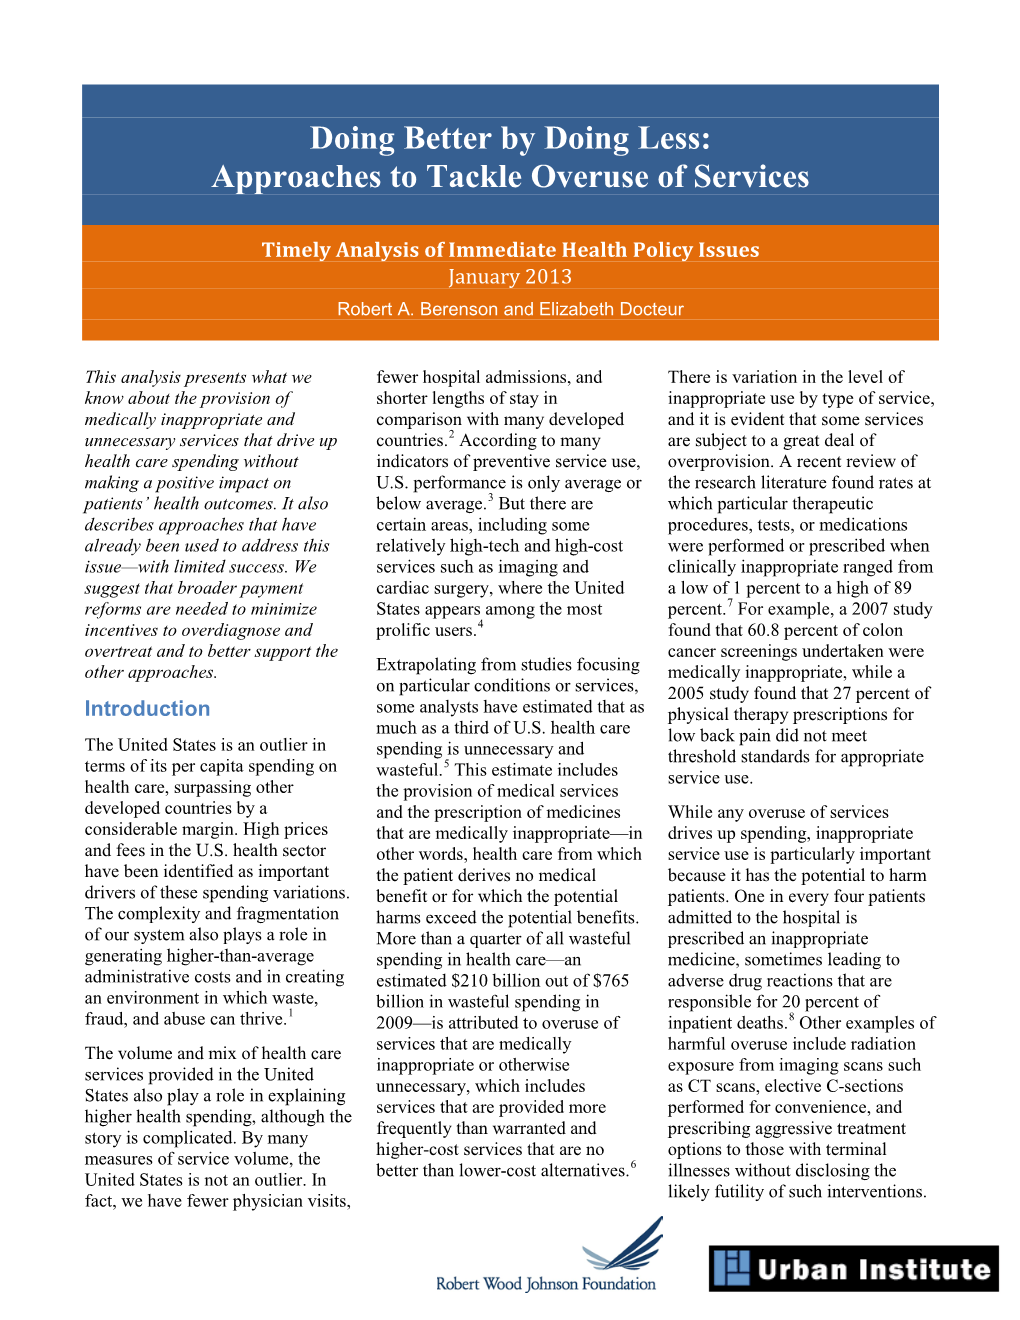 Approaches to Tackle Overuse of Services